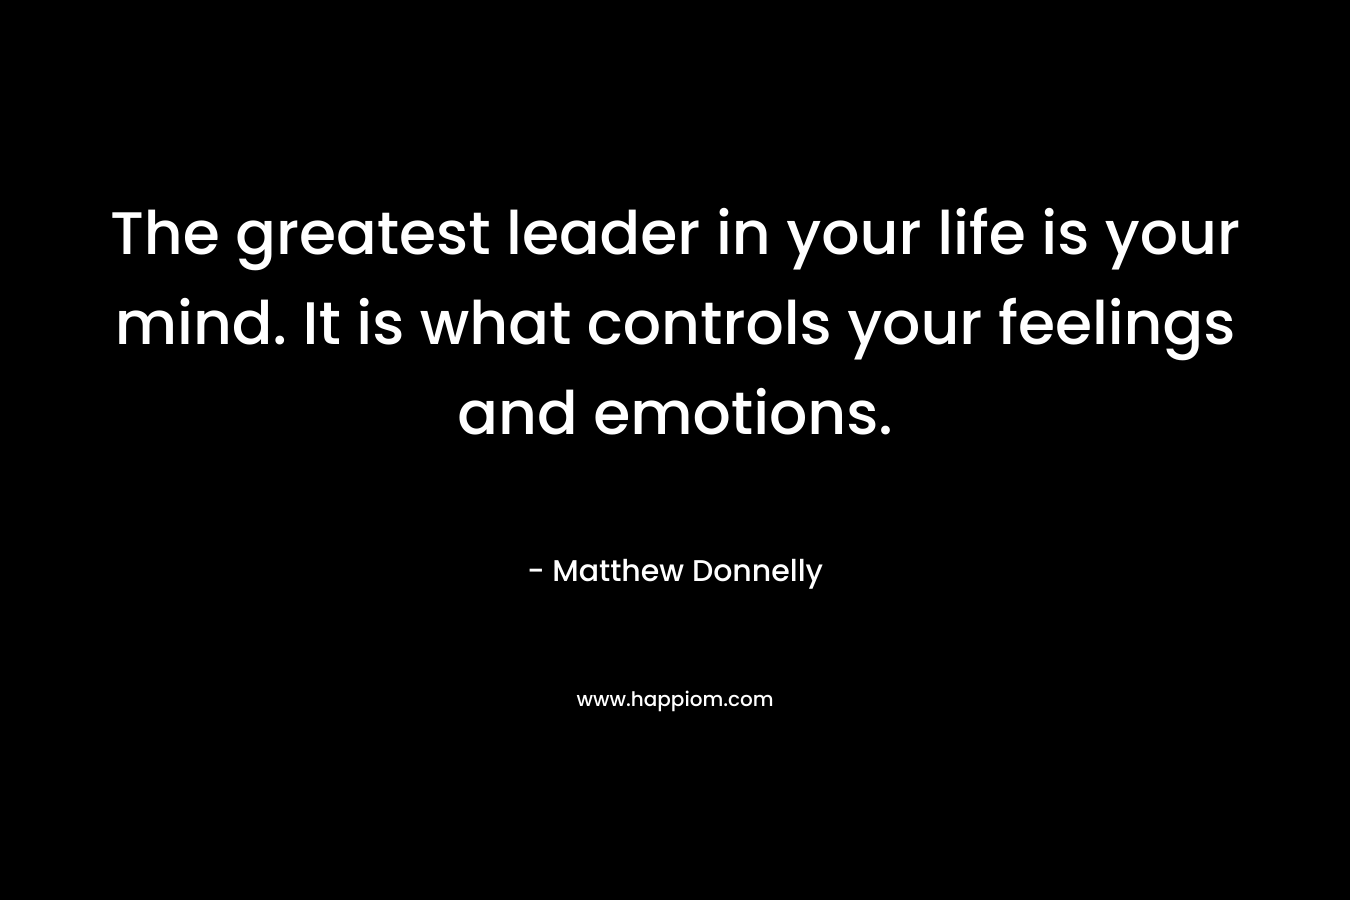 The greatest leader in your life is your mind. It is what controls your feelings and emotions.